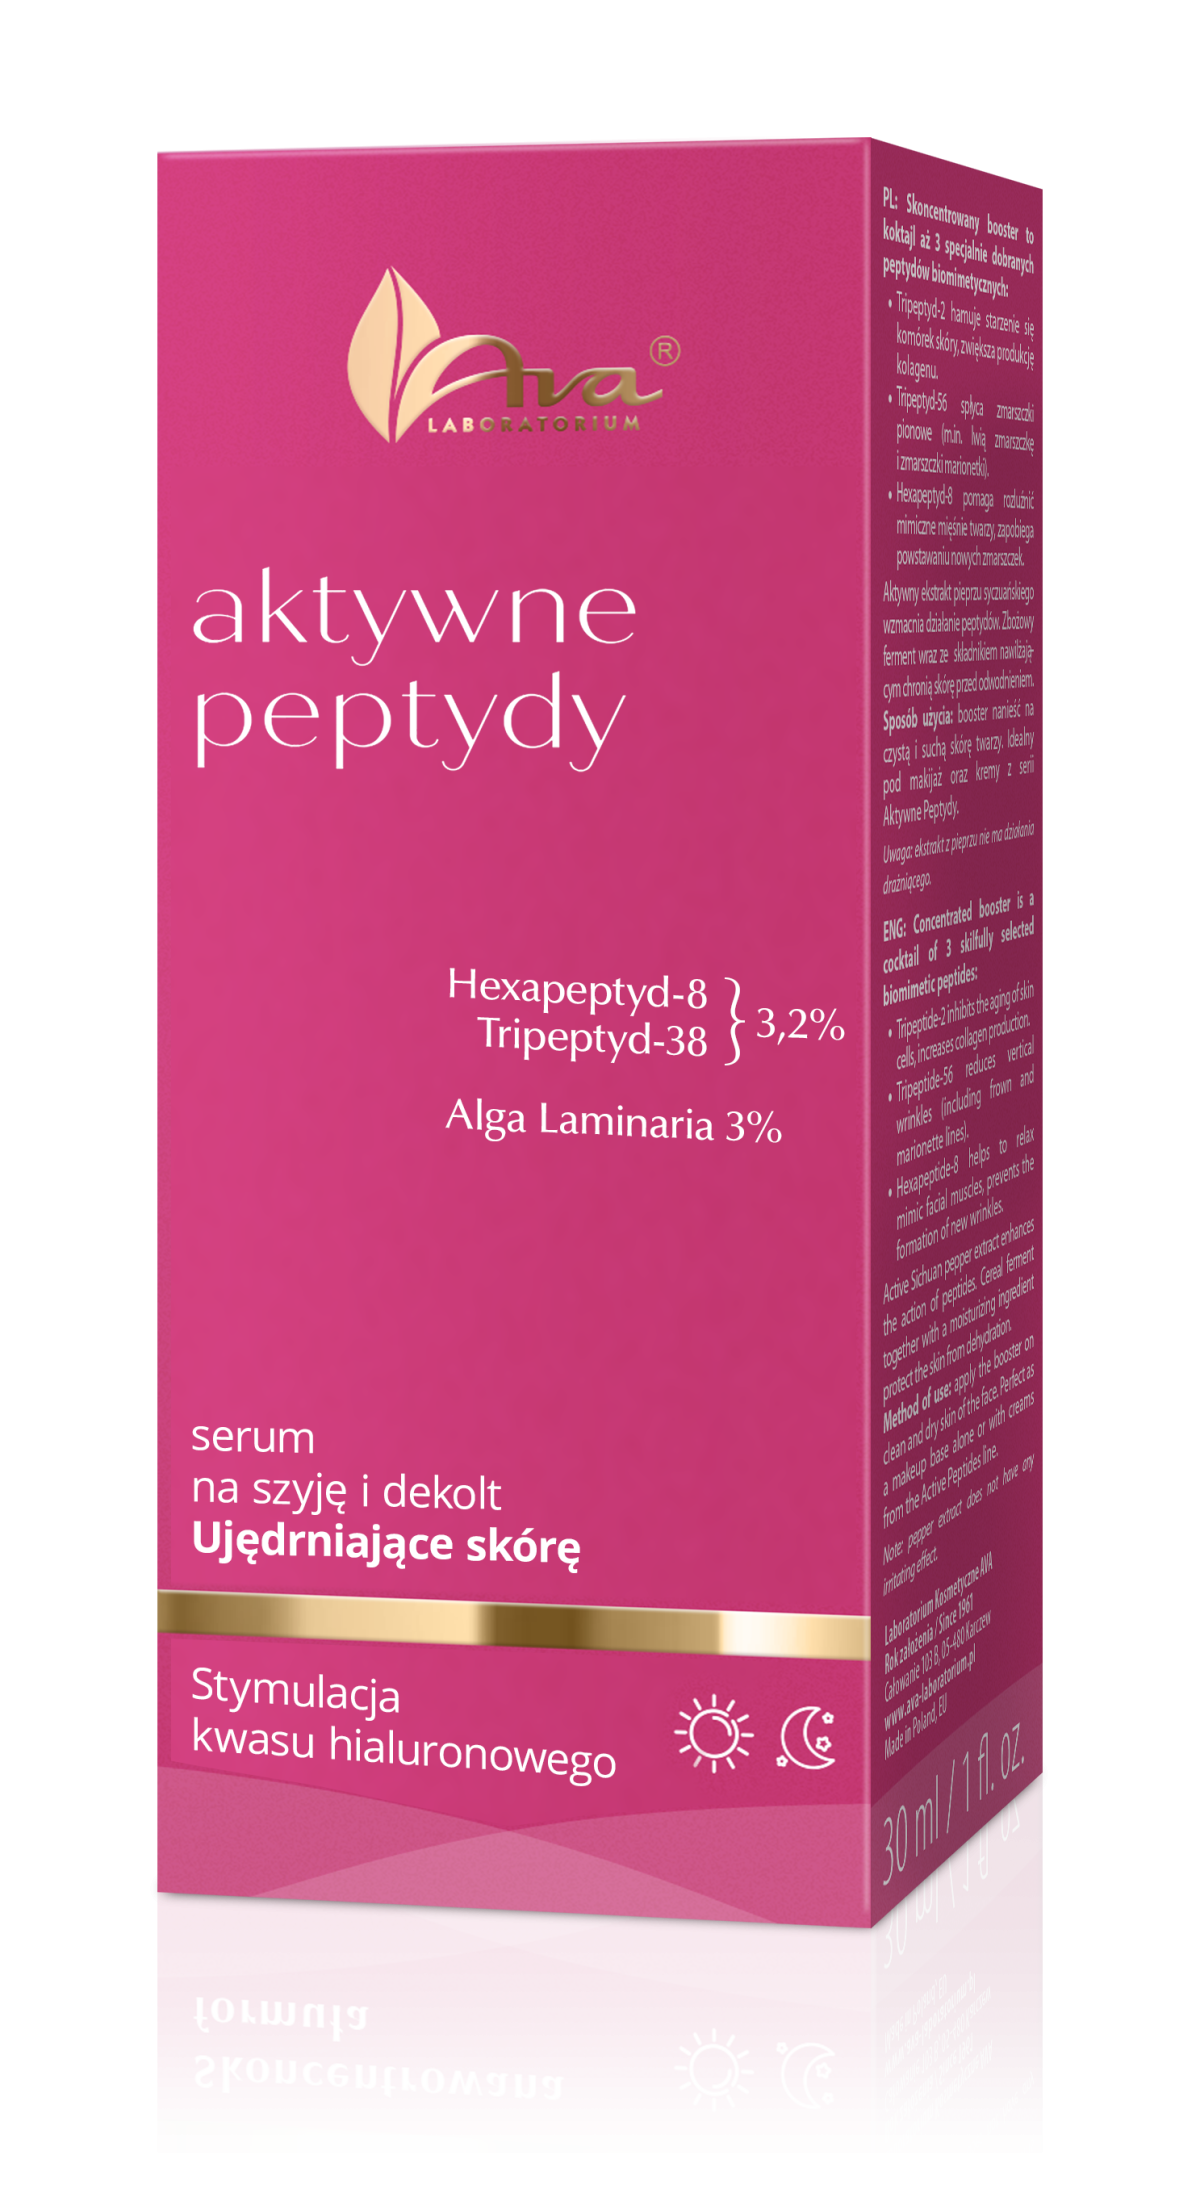 Active Peptides – Neck and cleavage serum